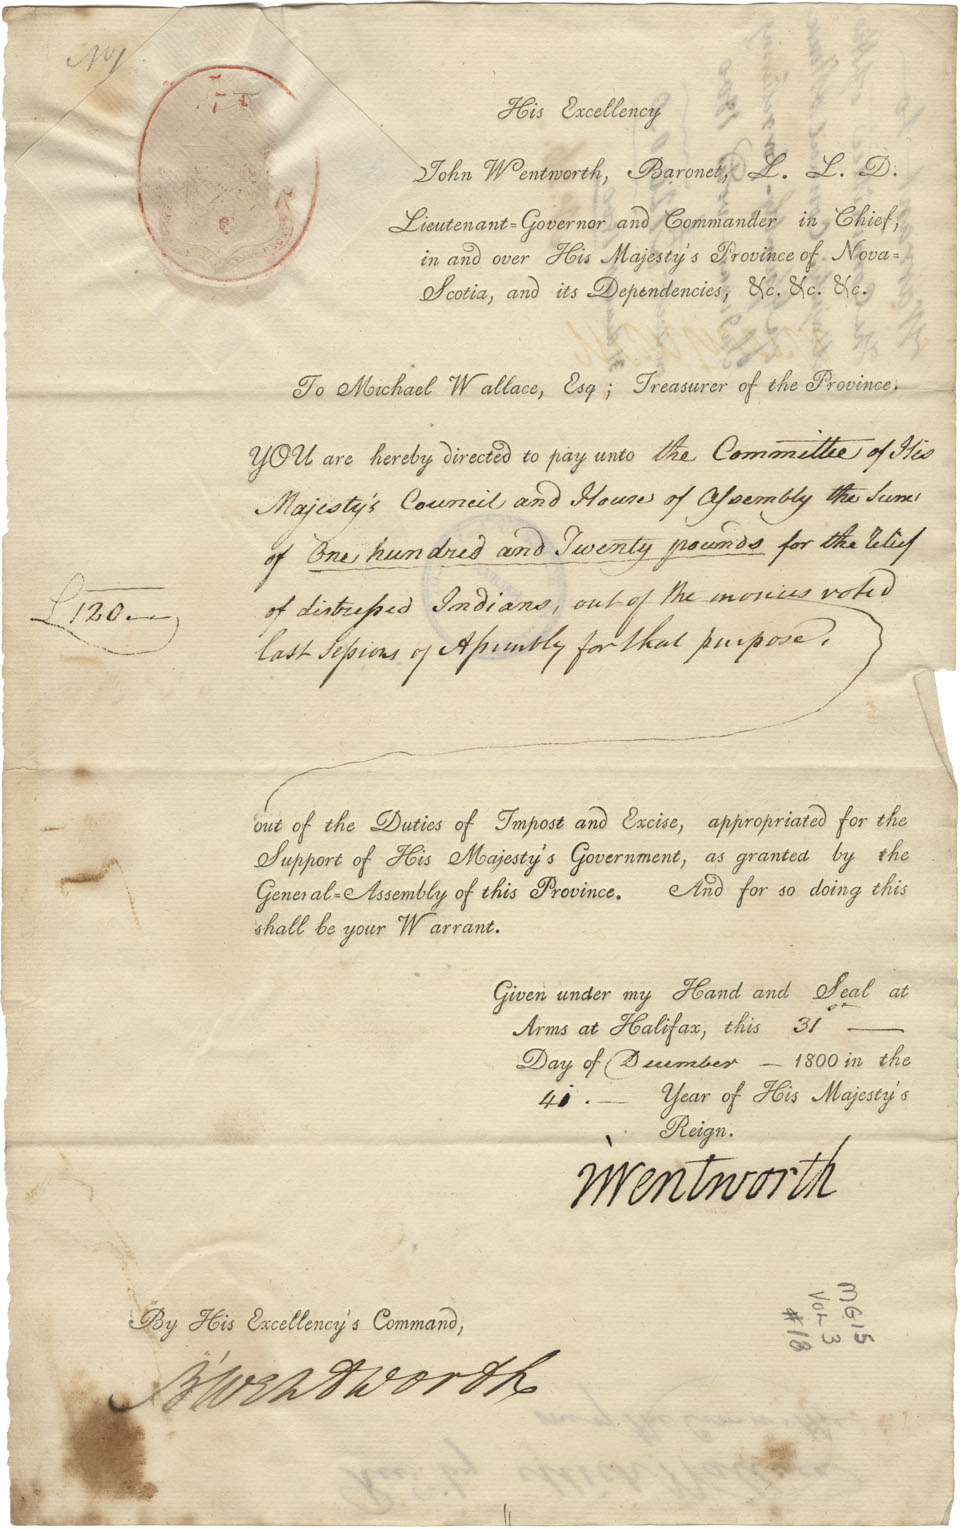 Sir John Wentworth's order to Michael Wallace, Provincial Treasurer, to pay the Committee of His Majesty's Council and House of Assembly £120 for relief of Mi'kmaq who are distressed.